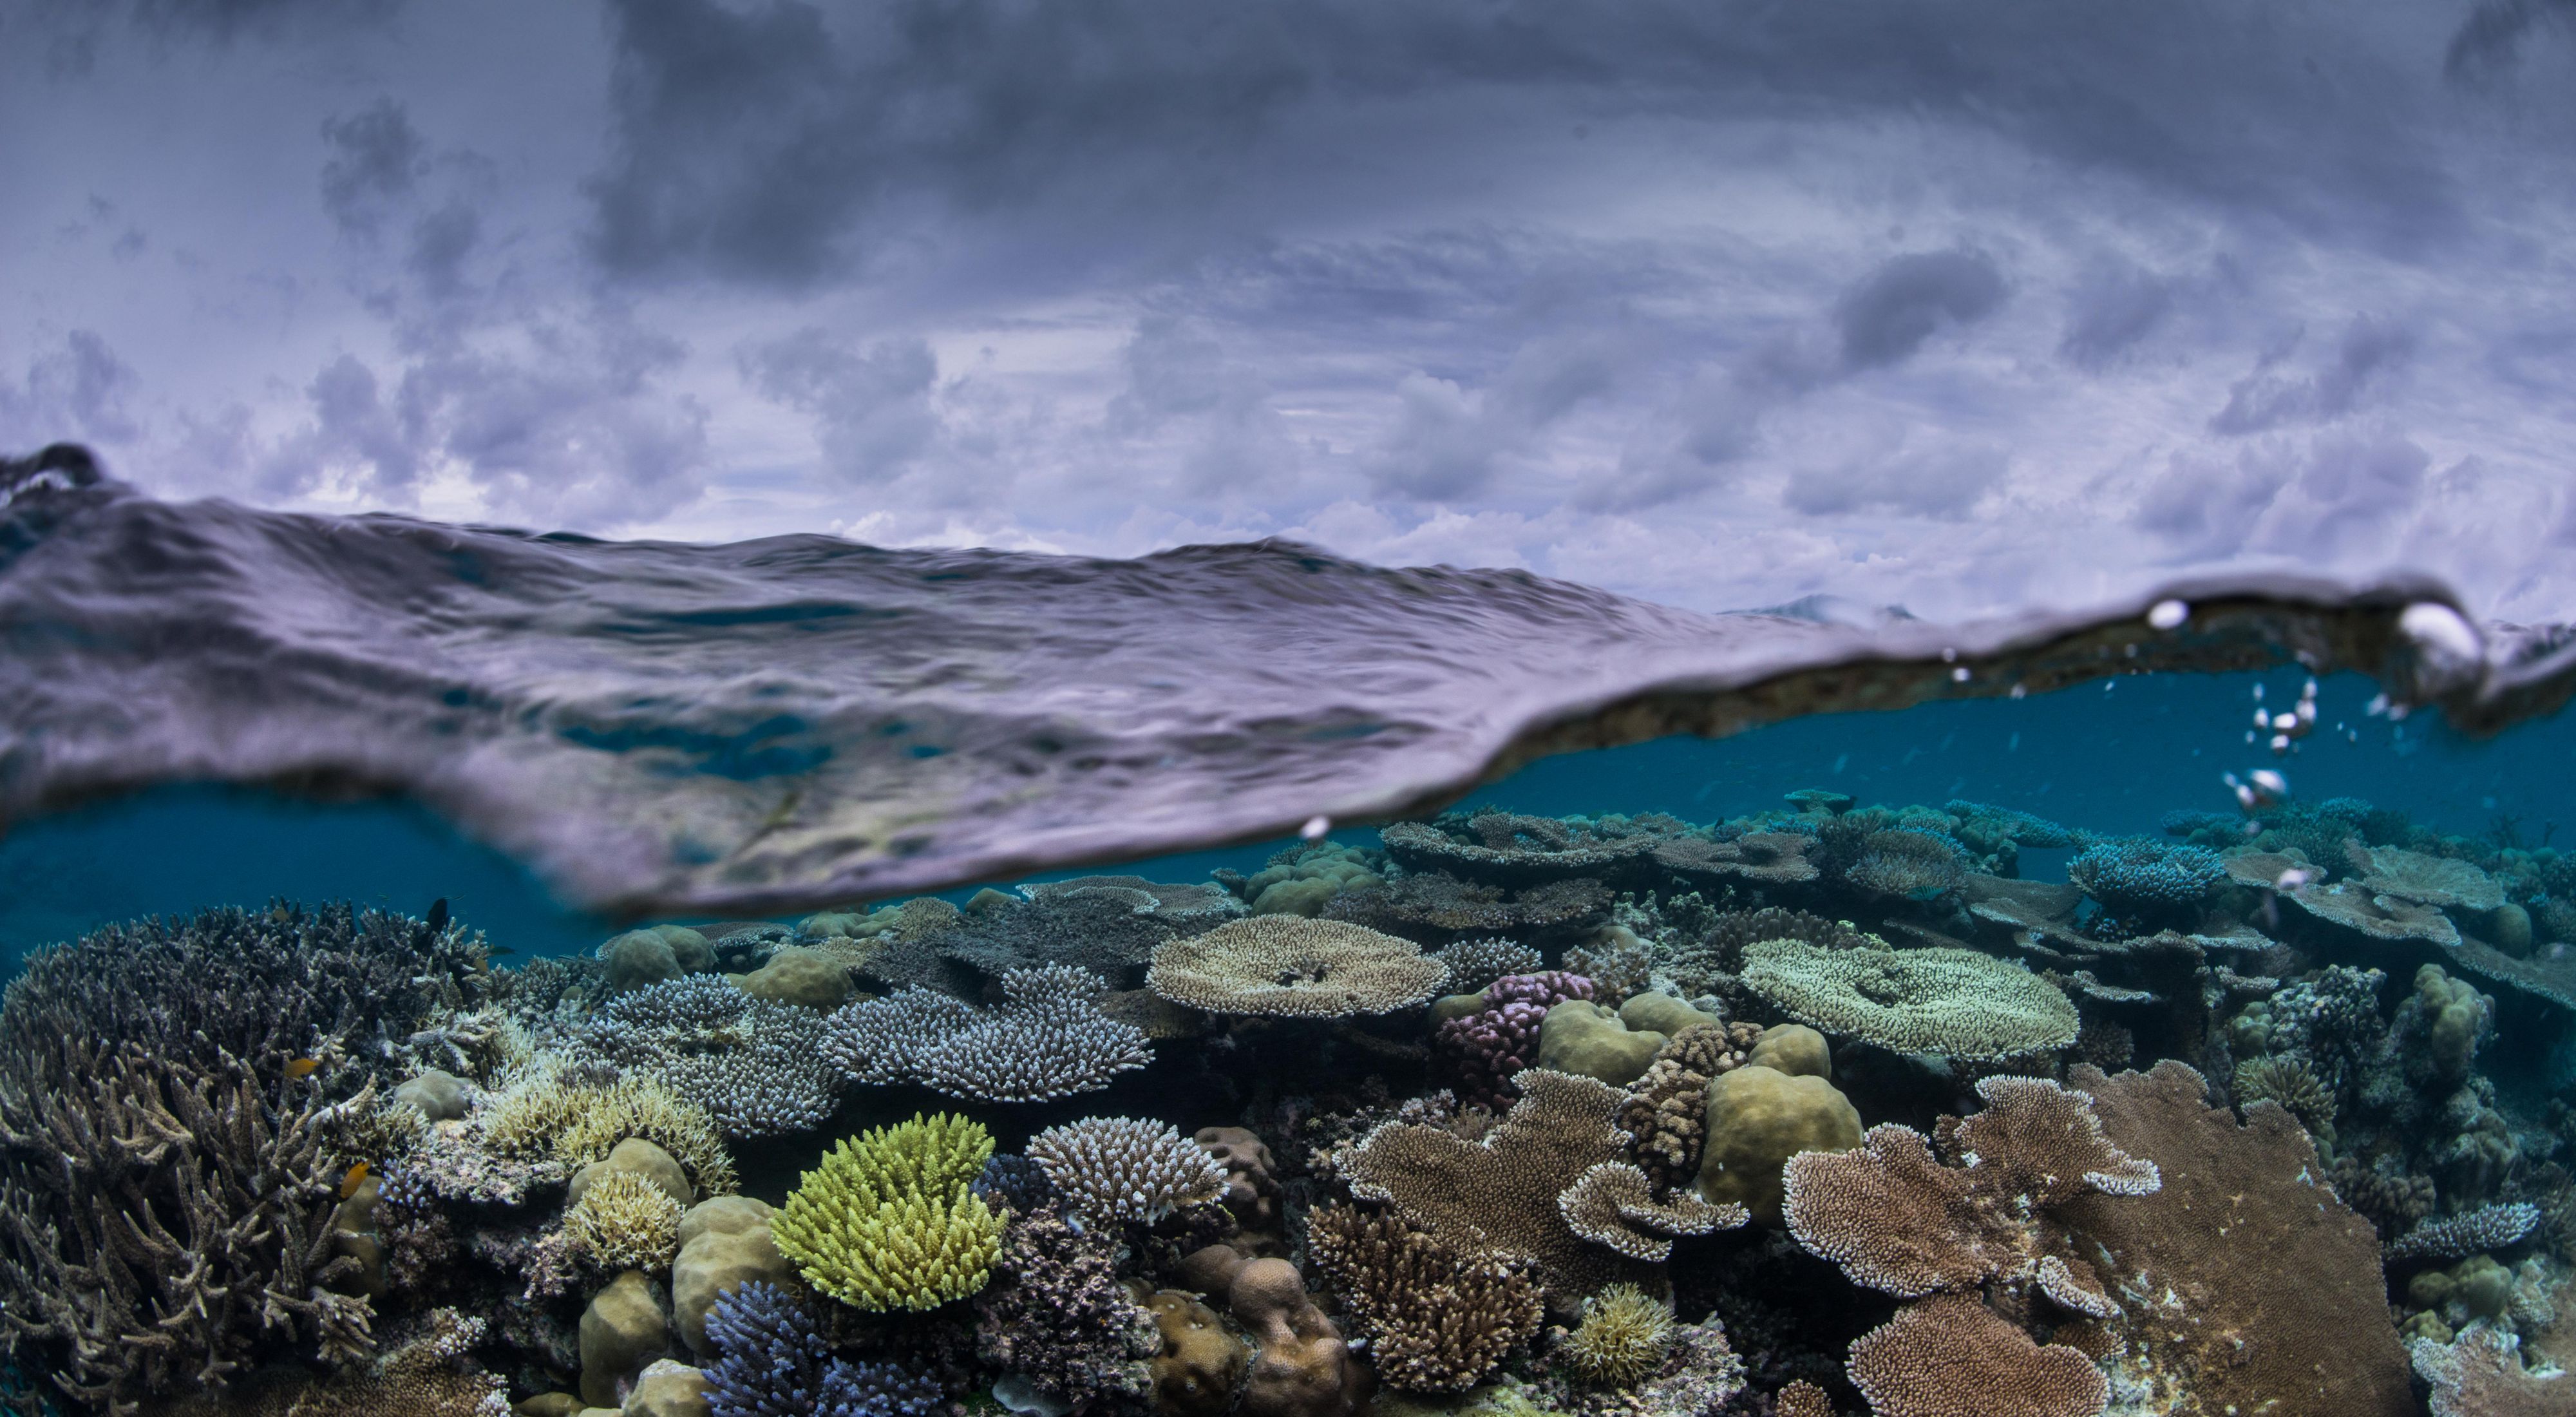 A split view of above and under water, showing sky and clouds above and a coral reef below the water's surface.